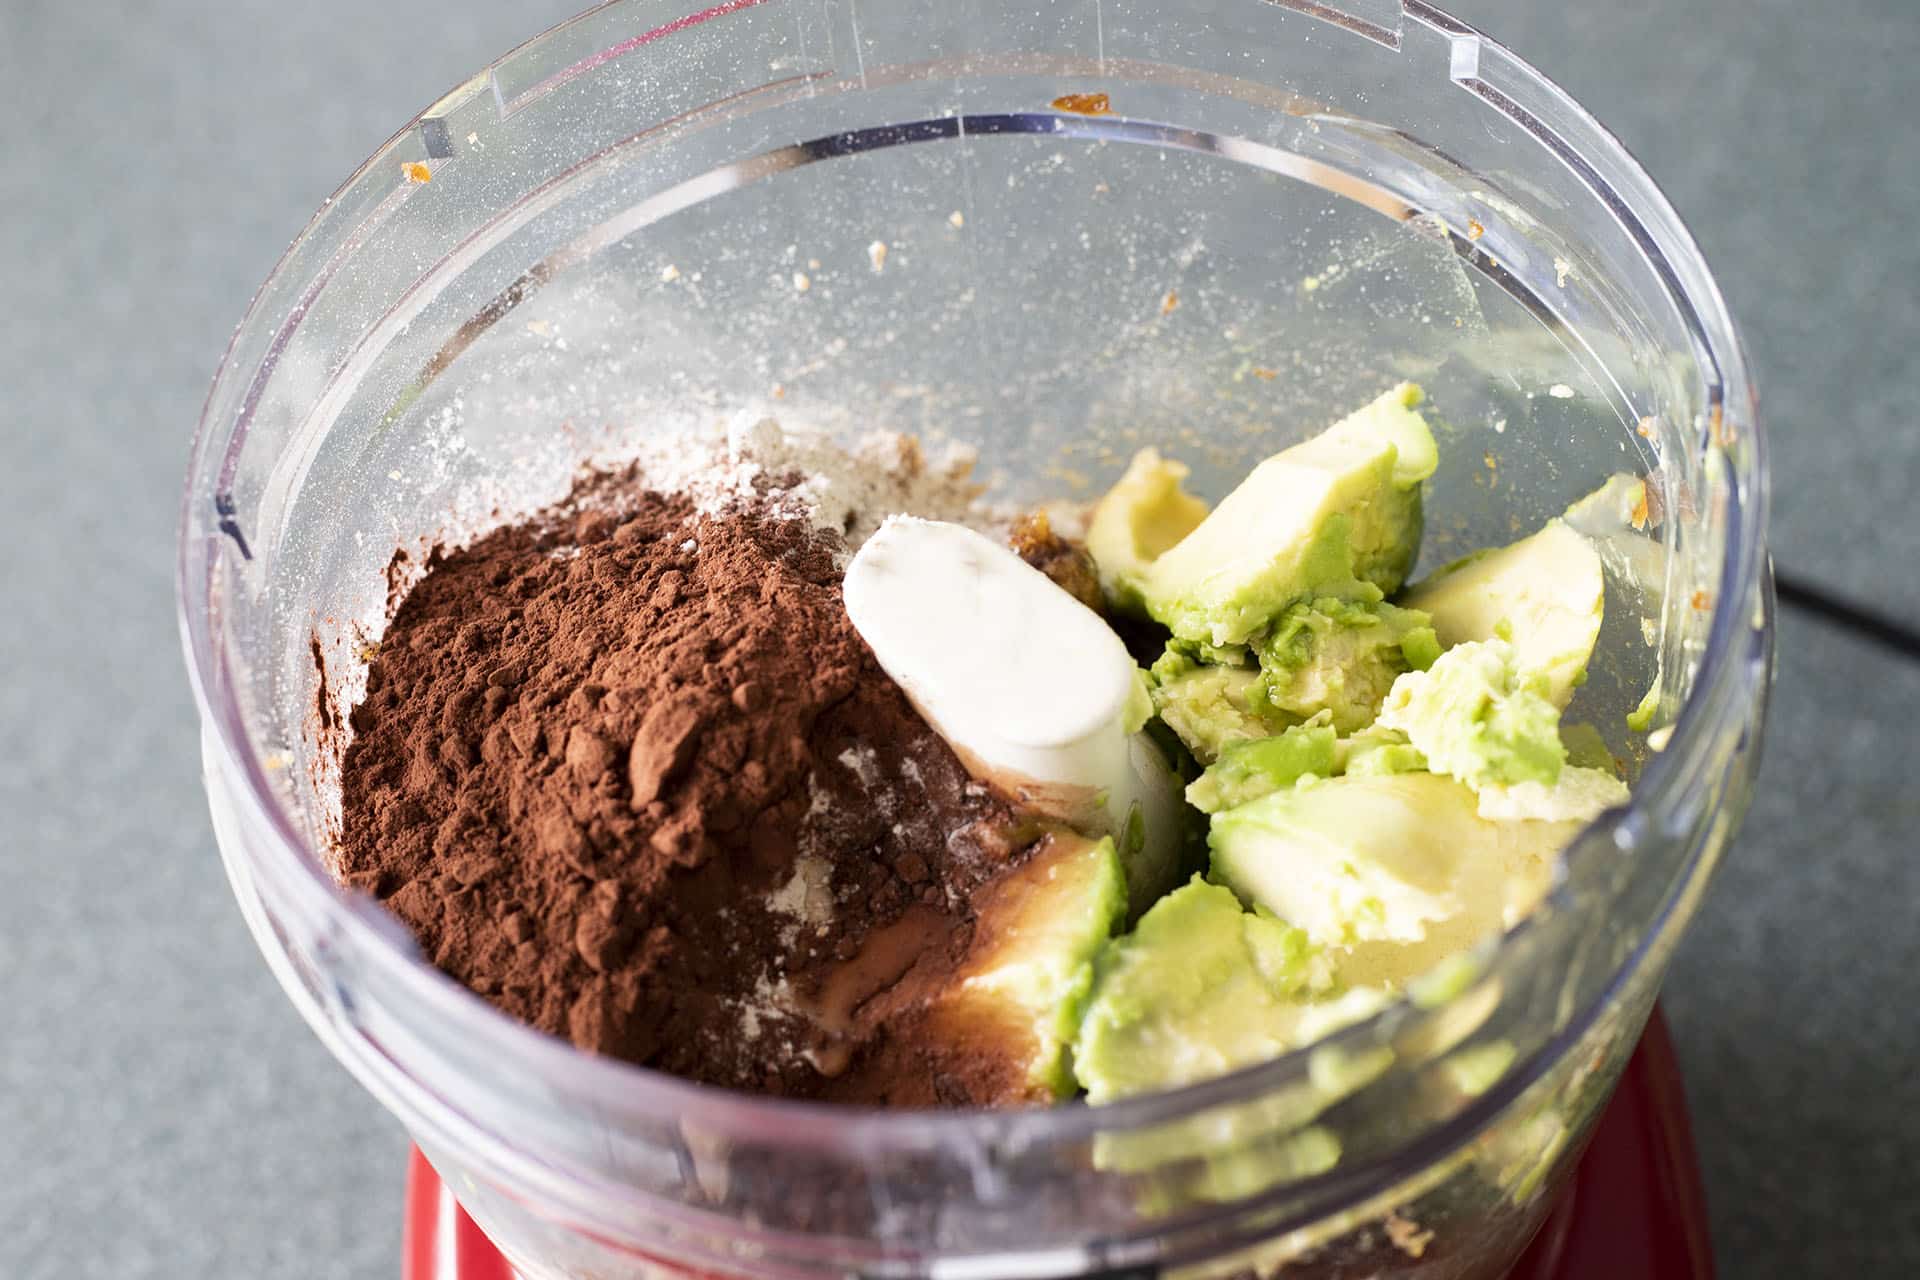 avocados and chocolate powder in food processor